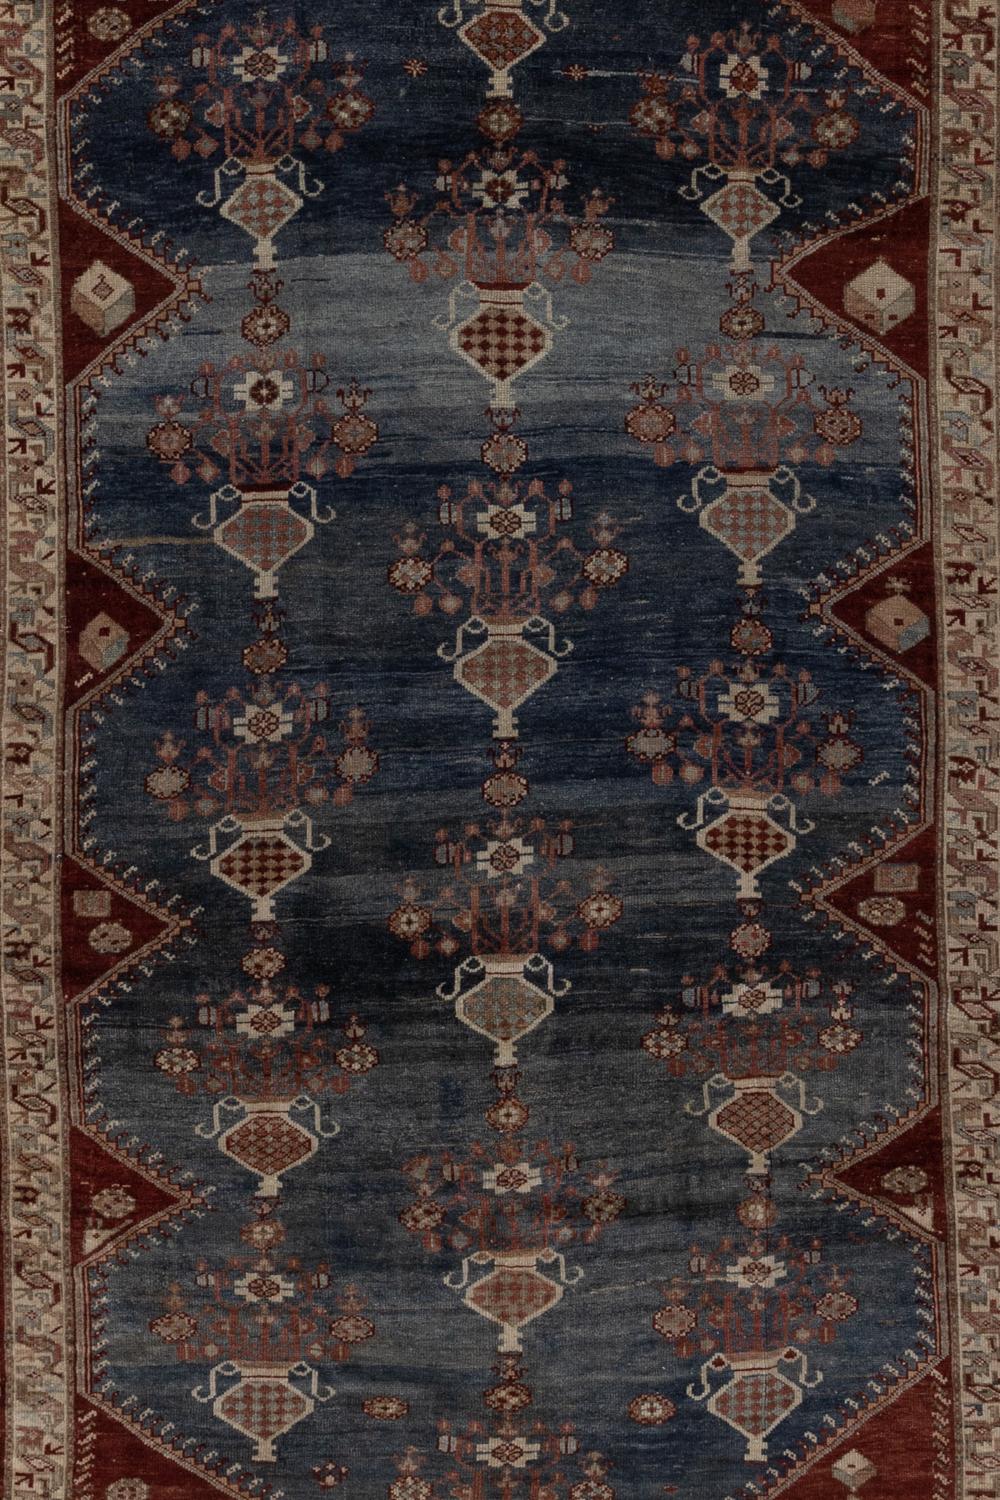 Age: 1920

Pile: Low-Medium

Wear Notes: 1

Material: Wool on Cotton

Vintage rugs are made by hand over the course of months, sometimes years. Their imperfections and wear are evidence of the hard working human hands that made them and the